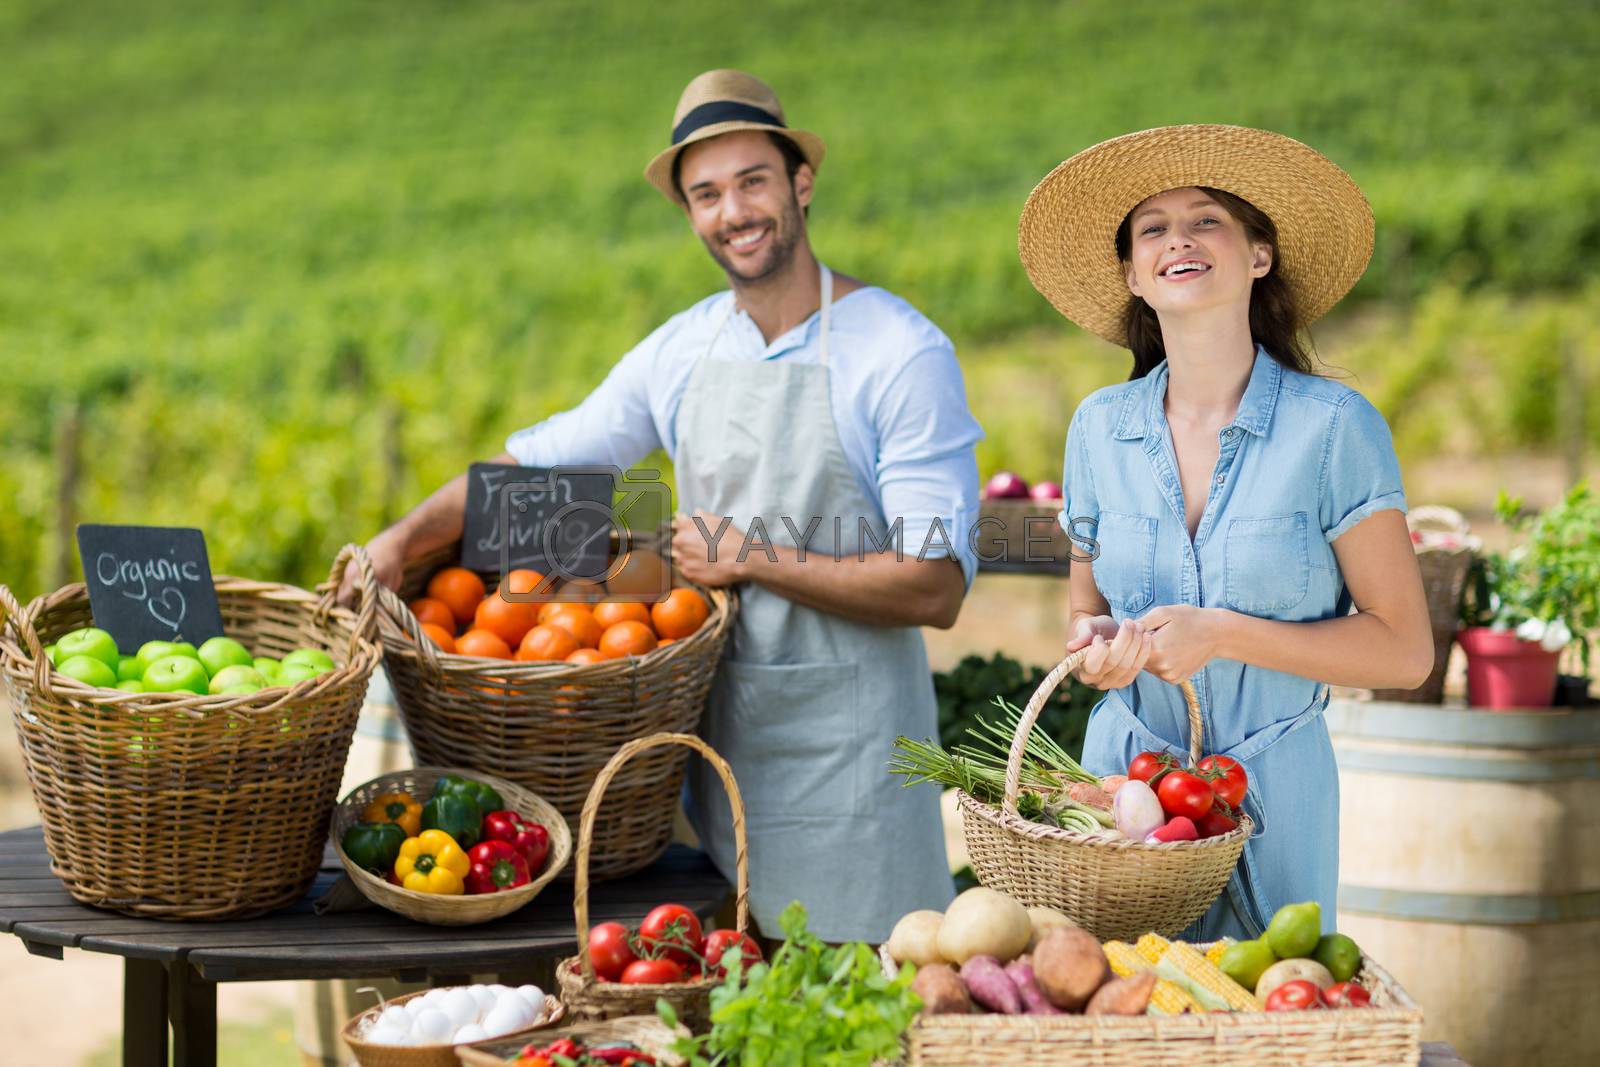 Royalty free image of Smiling friends selling fruits and vegetables by Wavebreakmedia